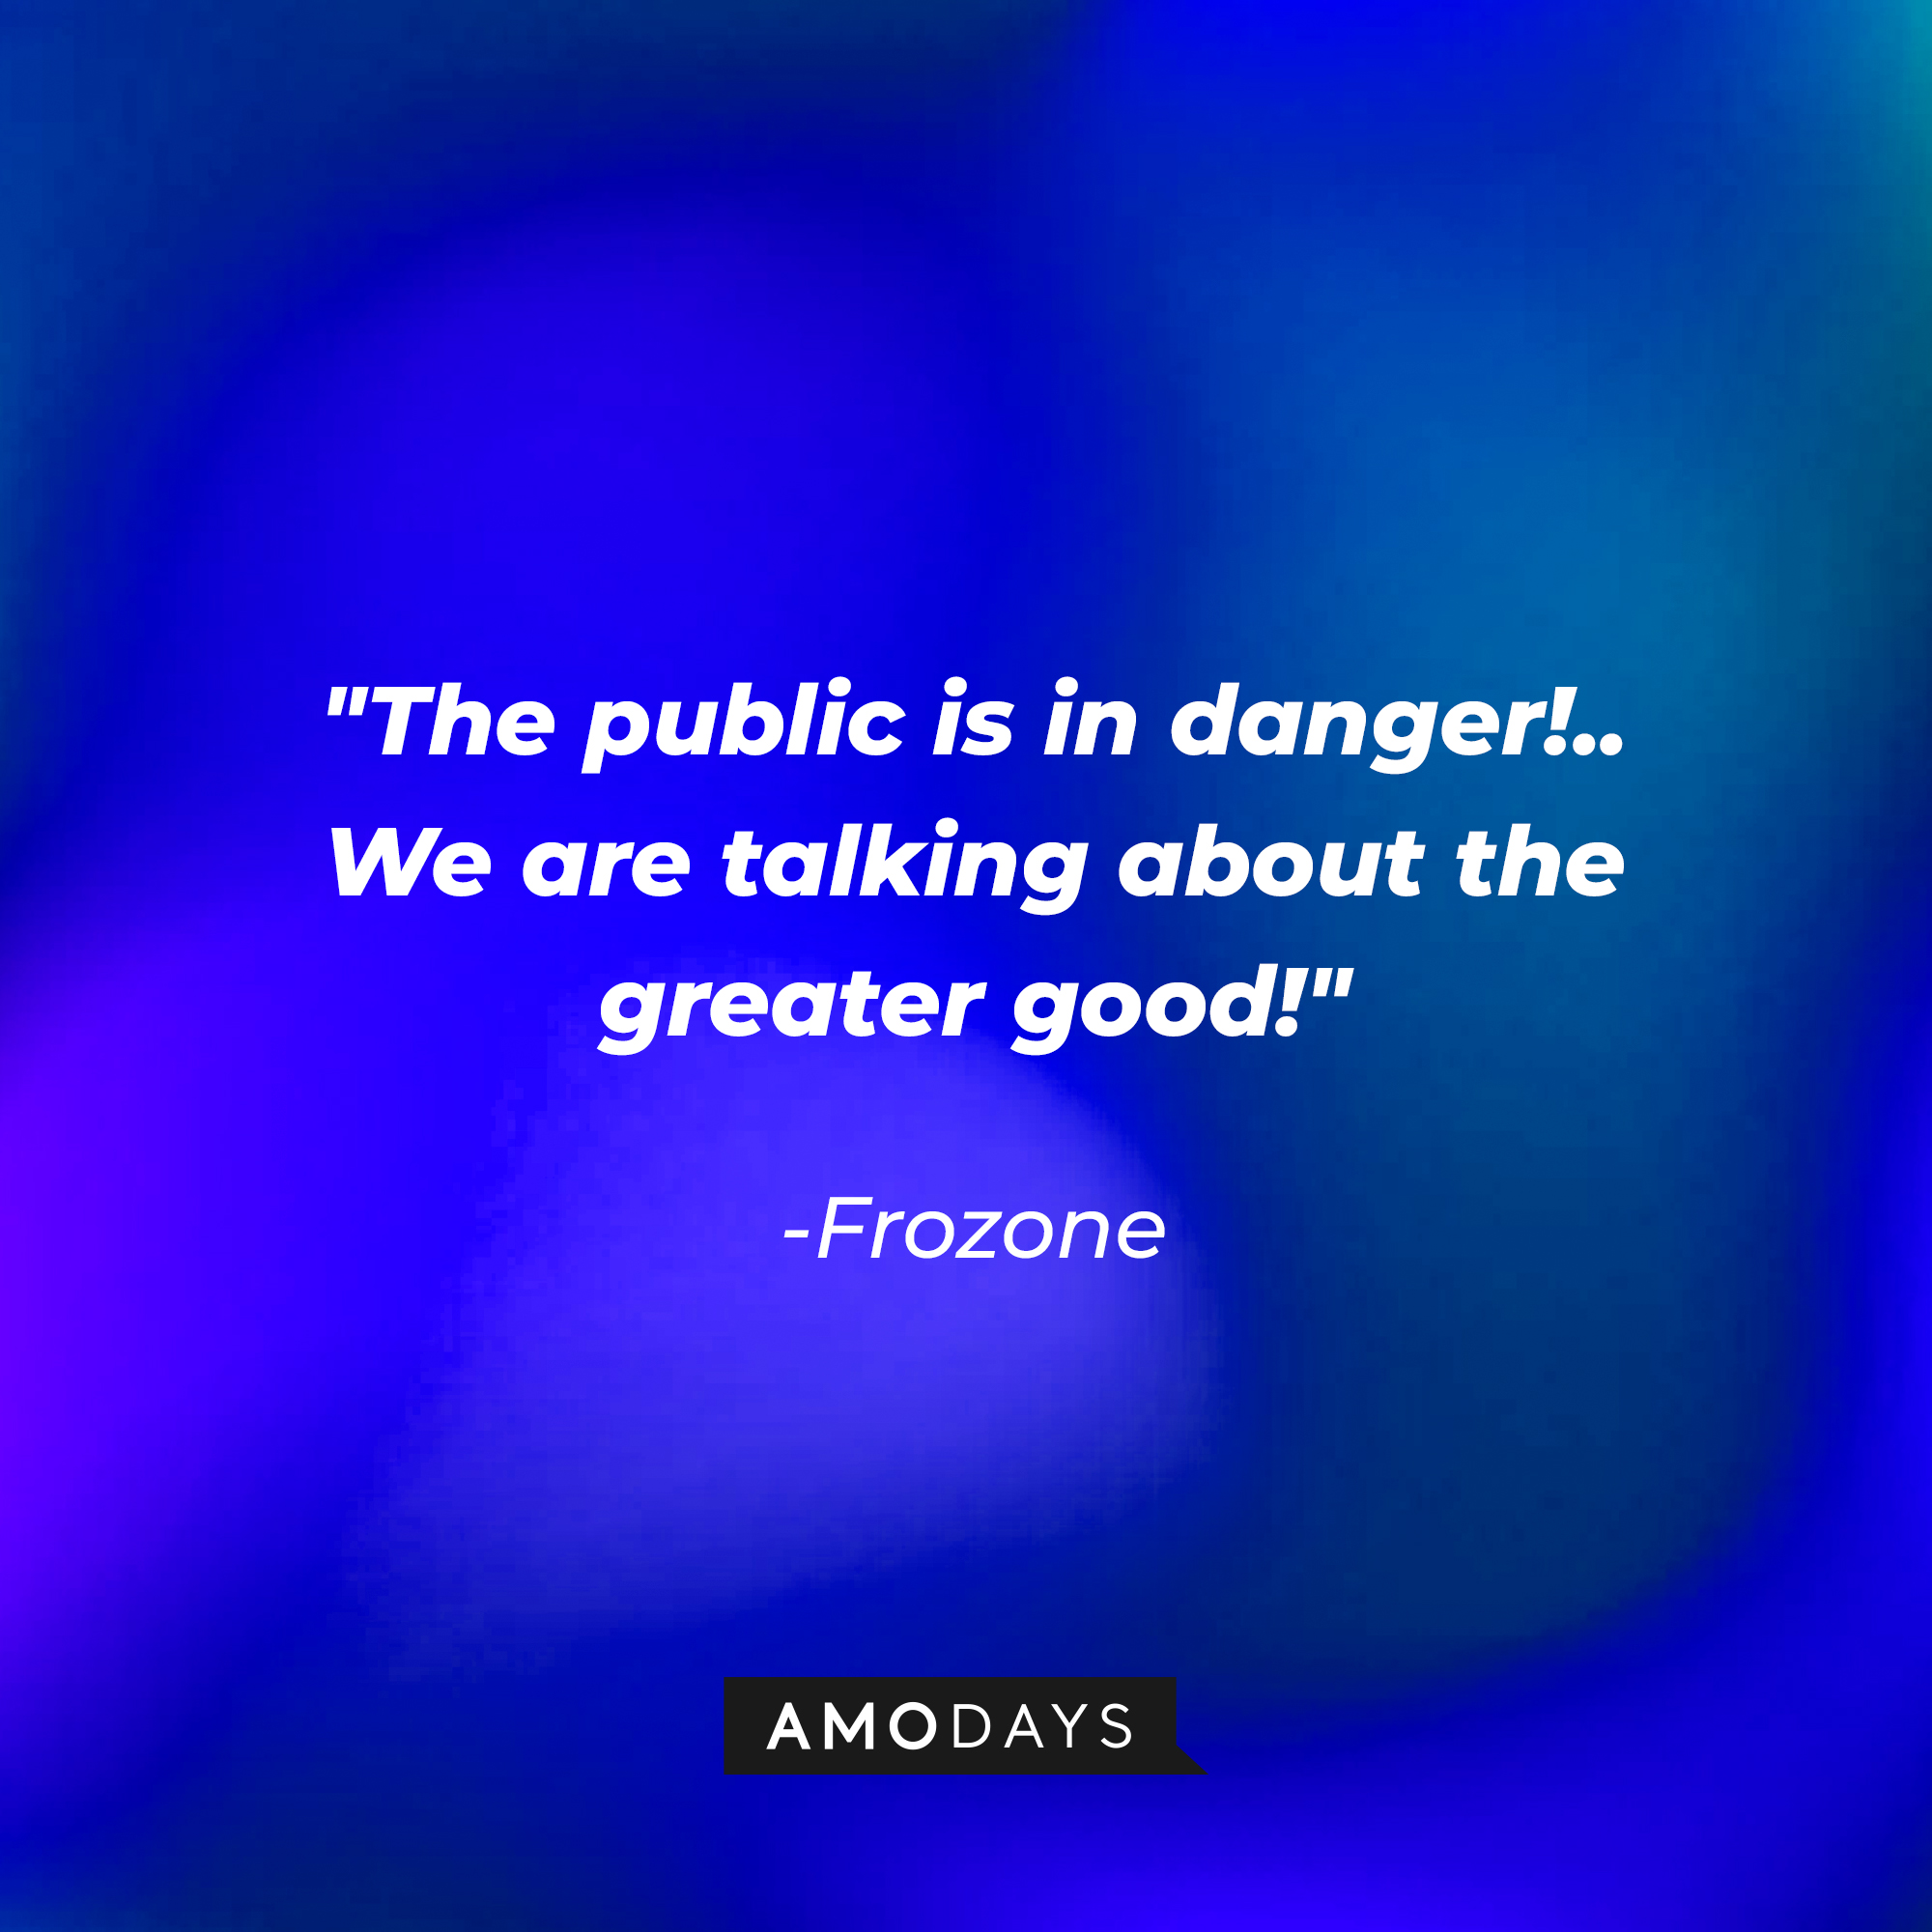 Frozone's quote: "The public is in danger!... We are talking about the greater good!"  | Source: Amodays